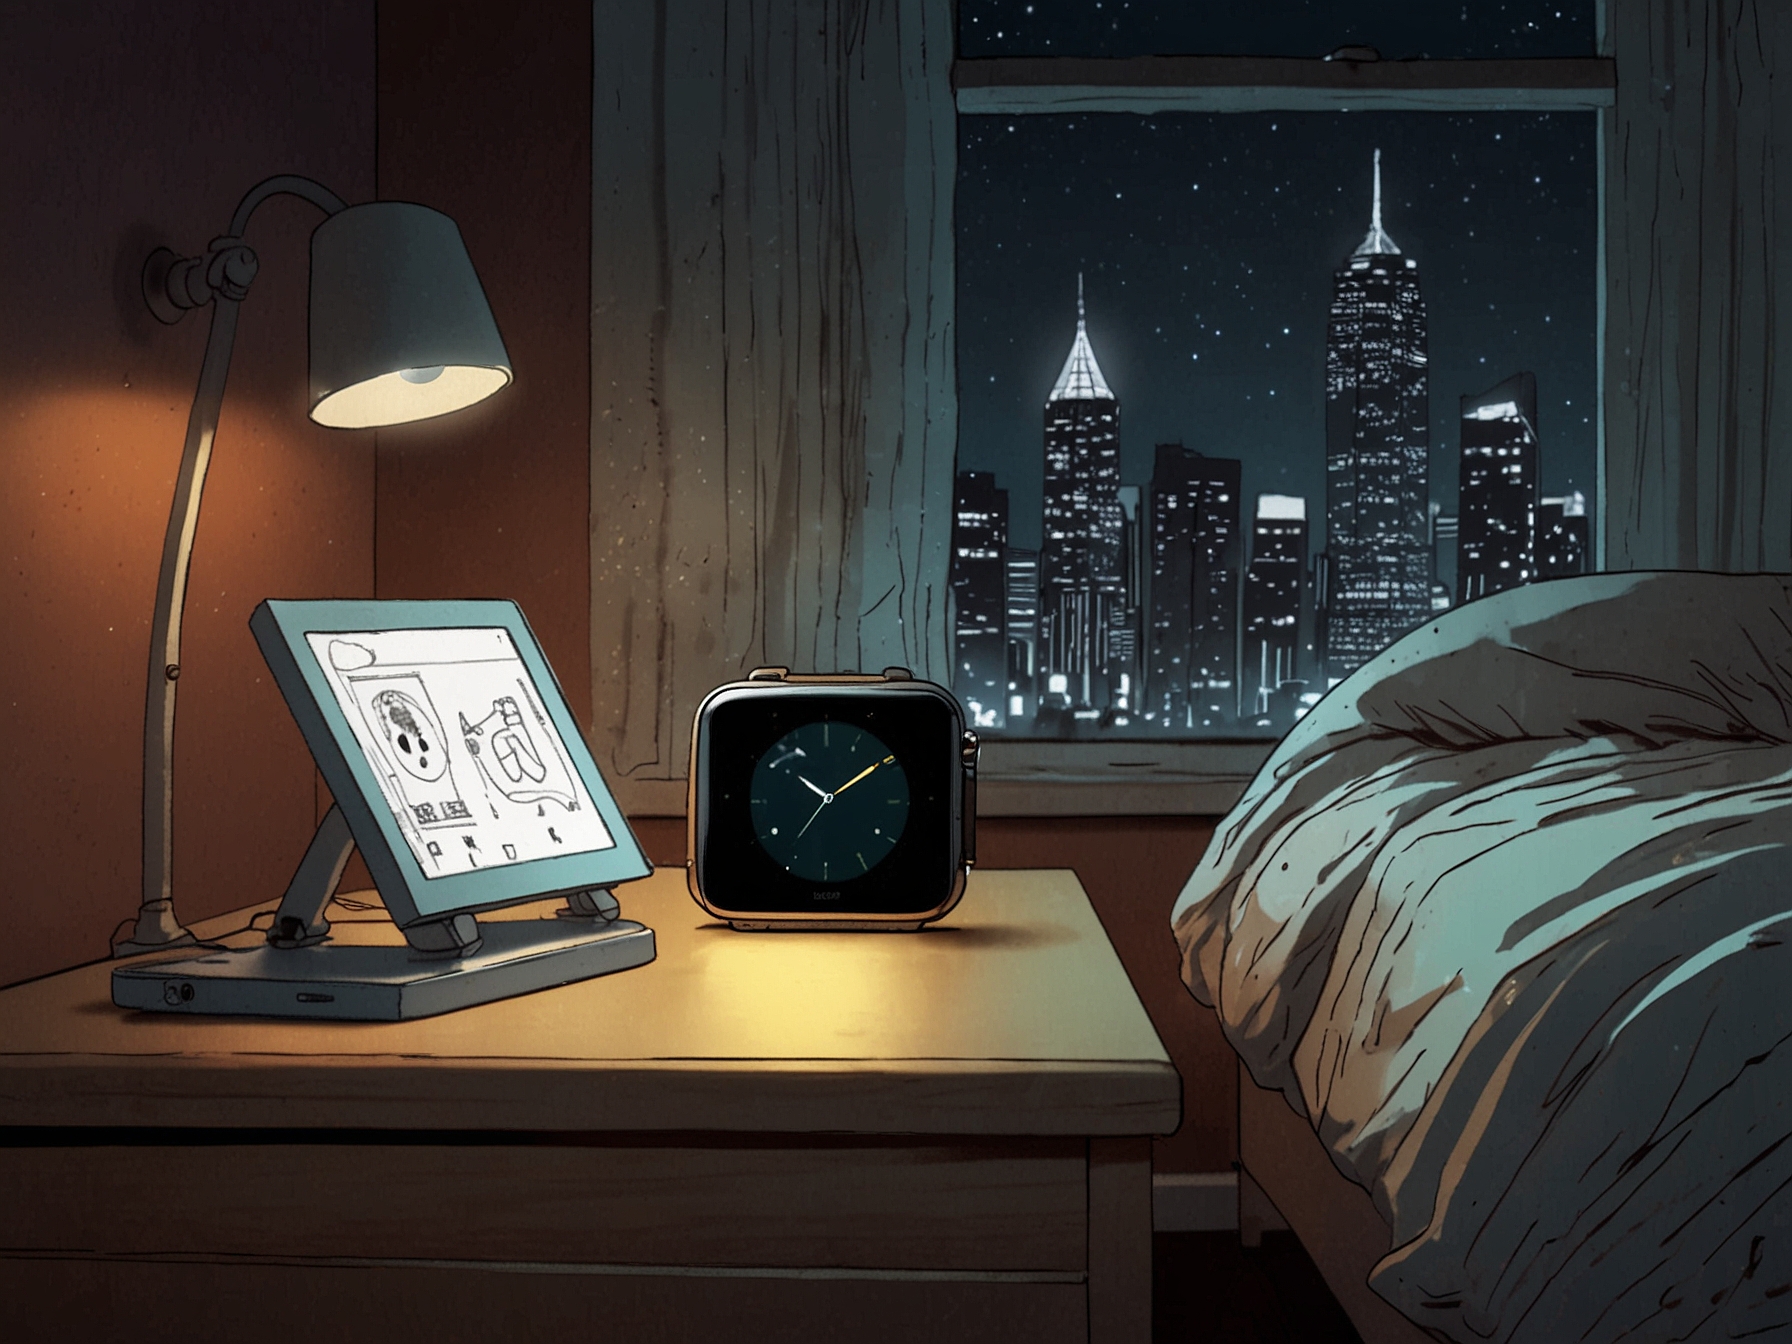 An illustration of a smartwatch with 'Sleep Mode' activated, showing a dimmed screen and no notifications. The watch is placed on a bedside table next to a sleeping person.